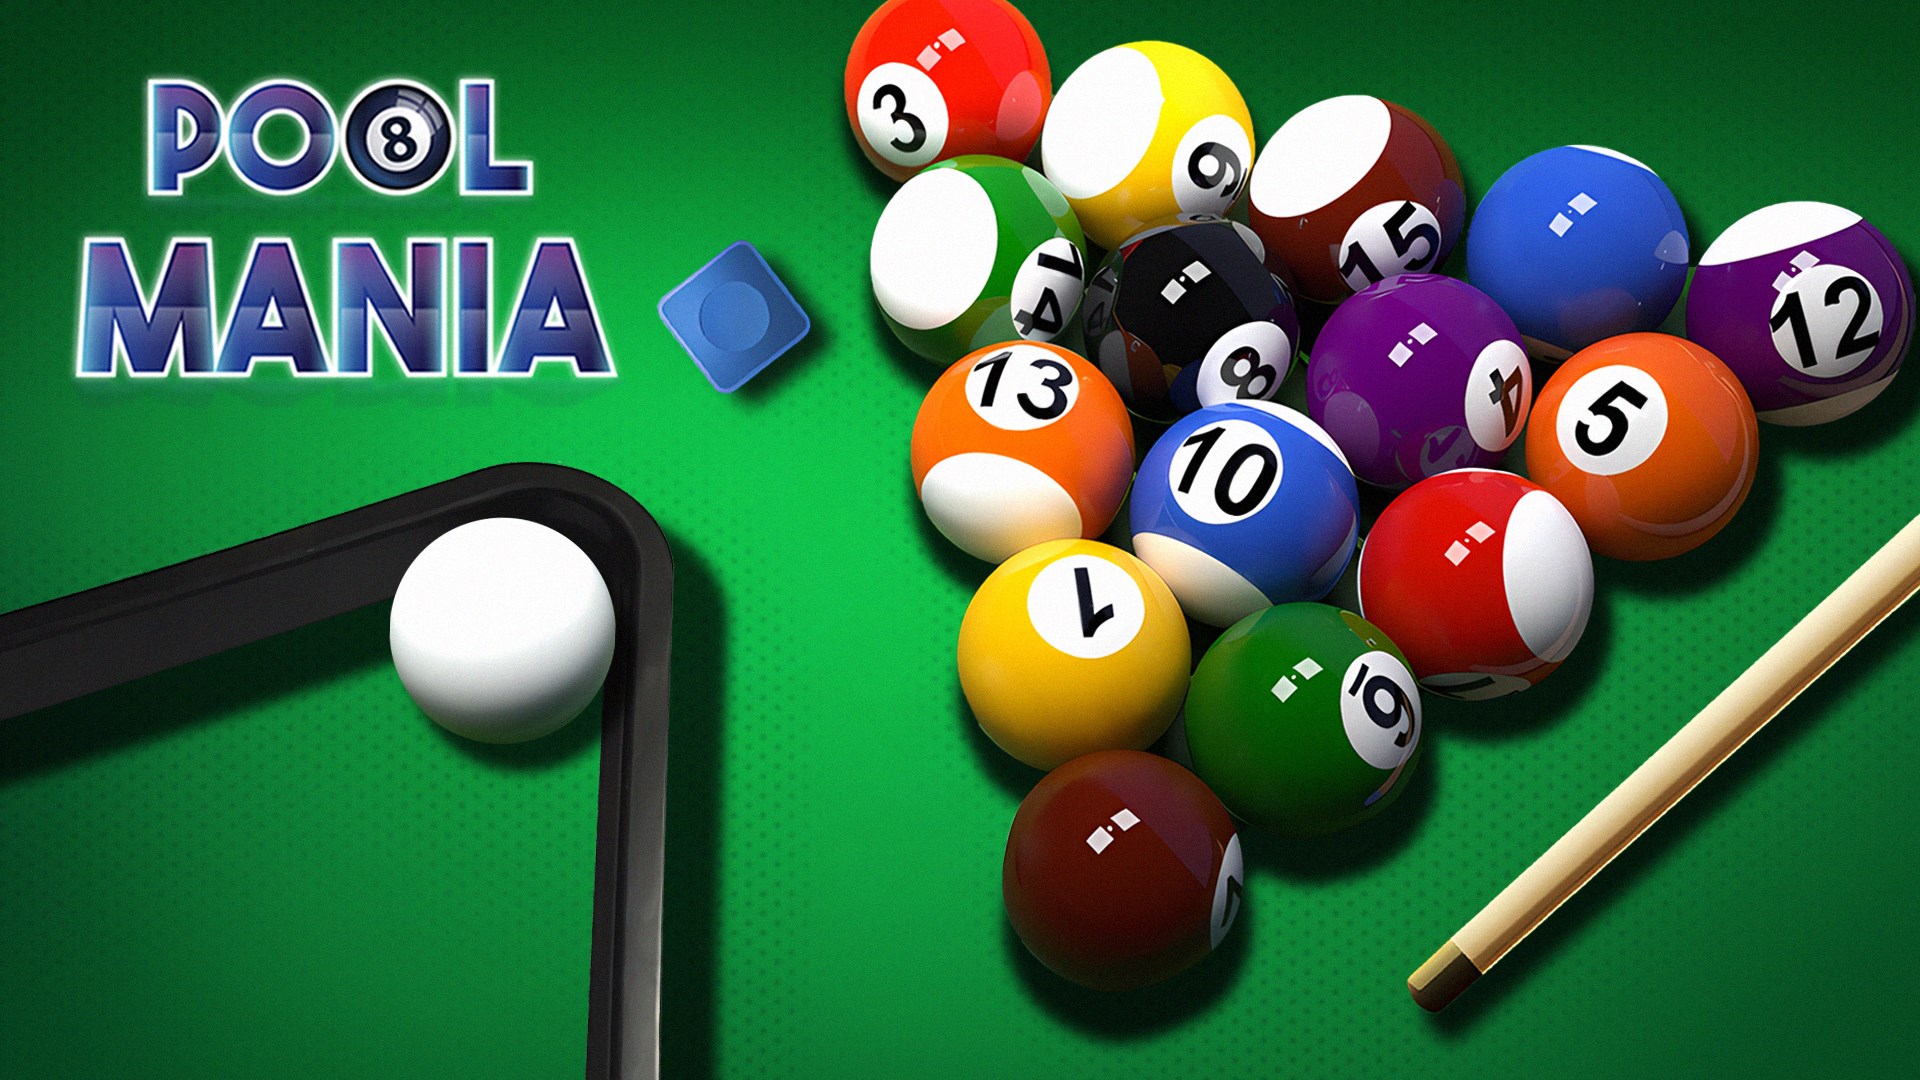 Play 8 Ball Pool Online: Multiplayer pool